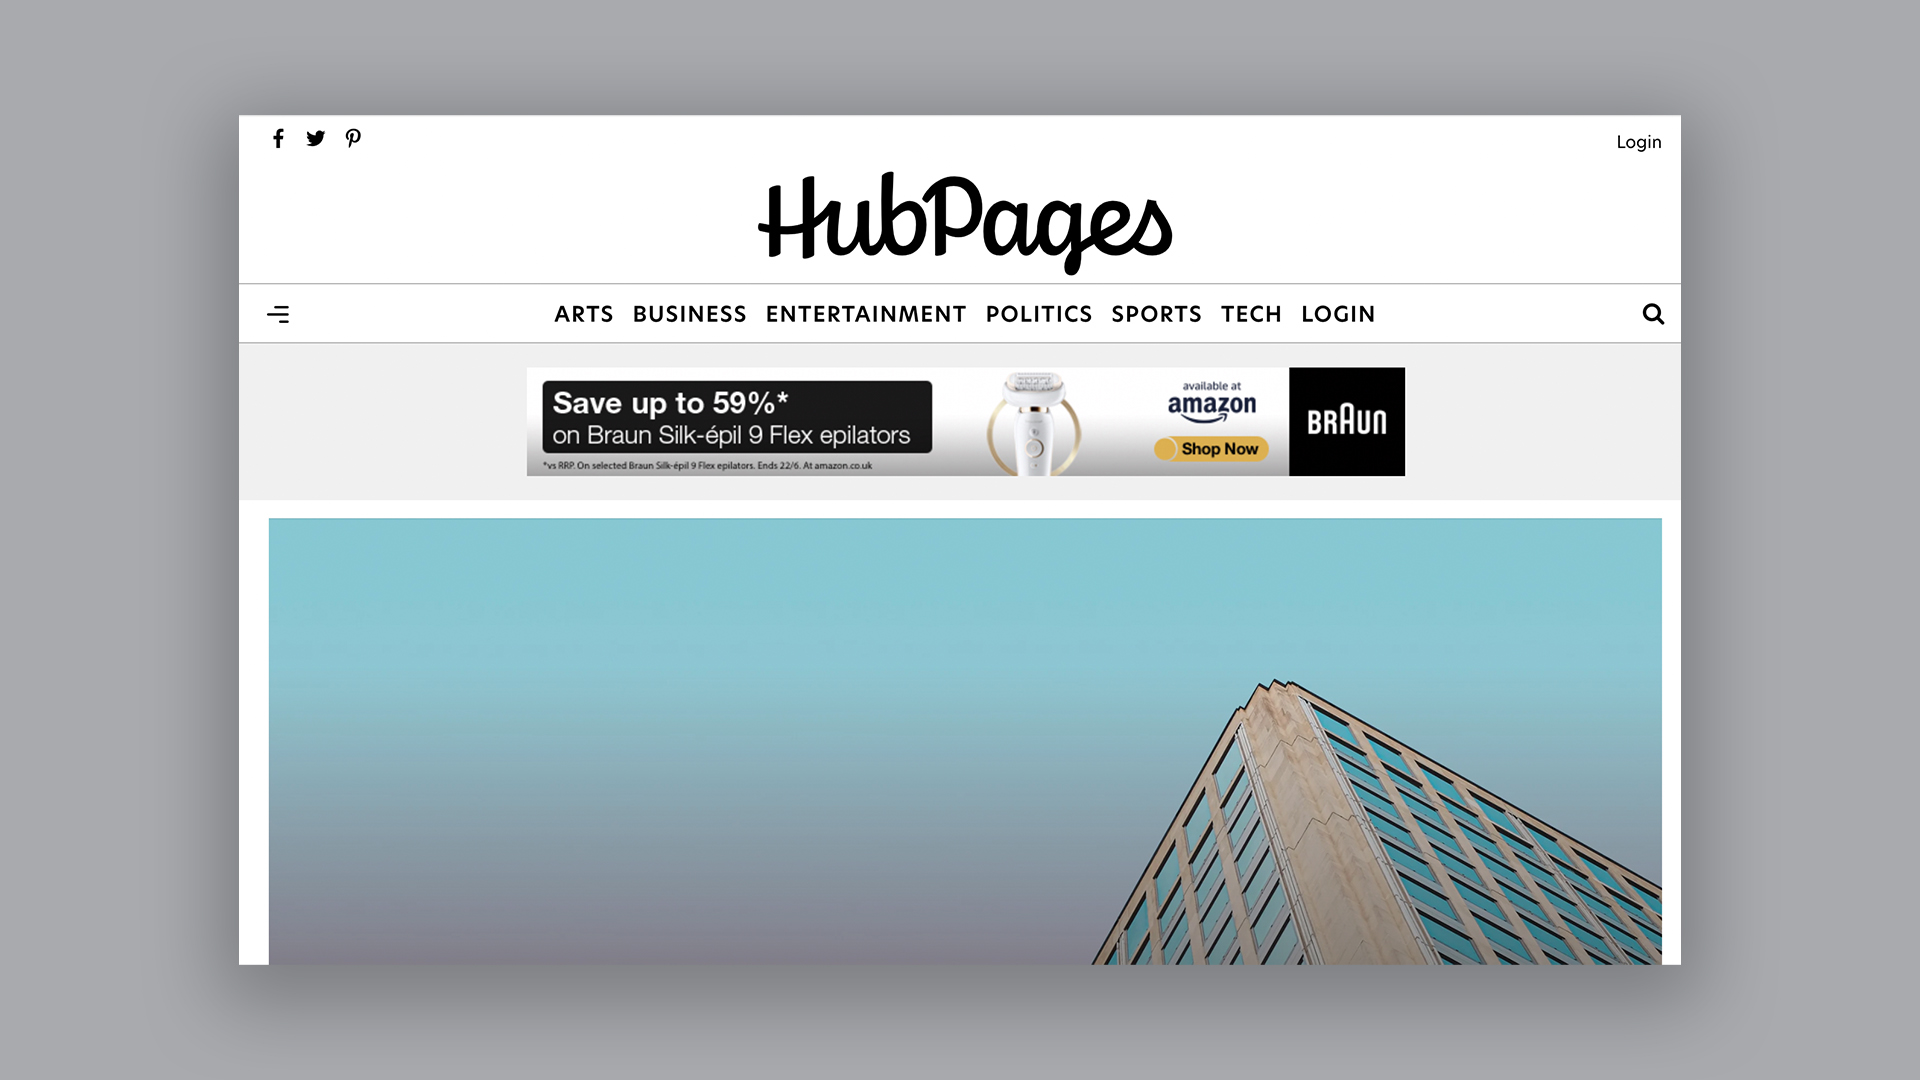 Homepage of Hubpages, one of the best blogging platforms, featuring photo of tall building